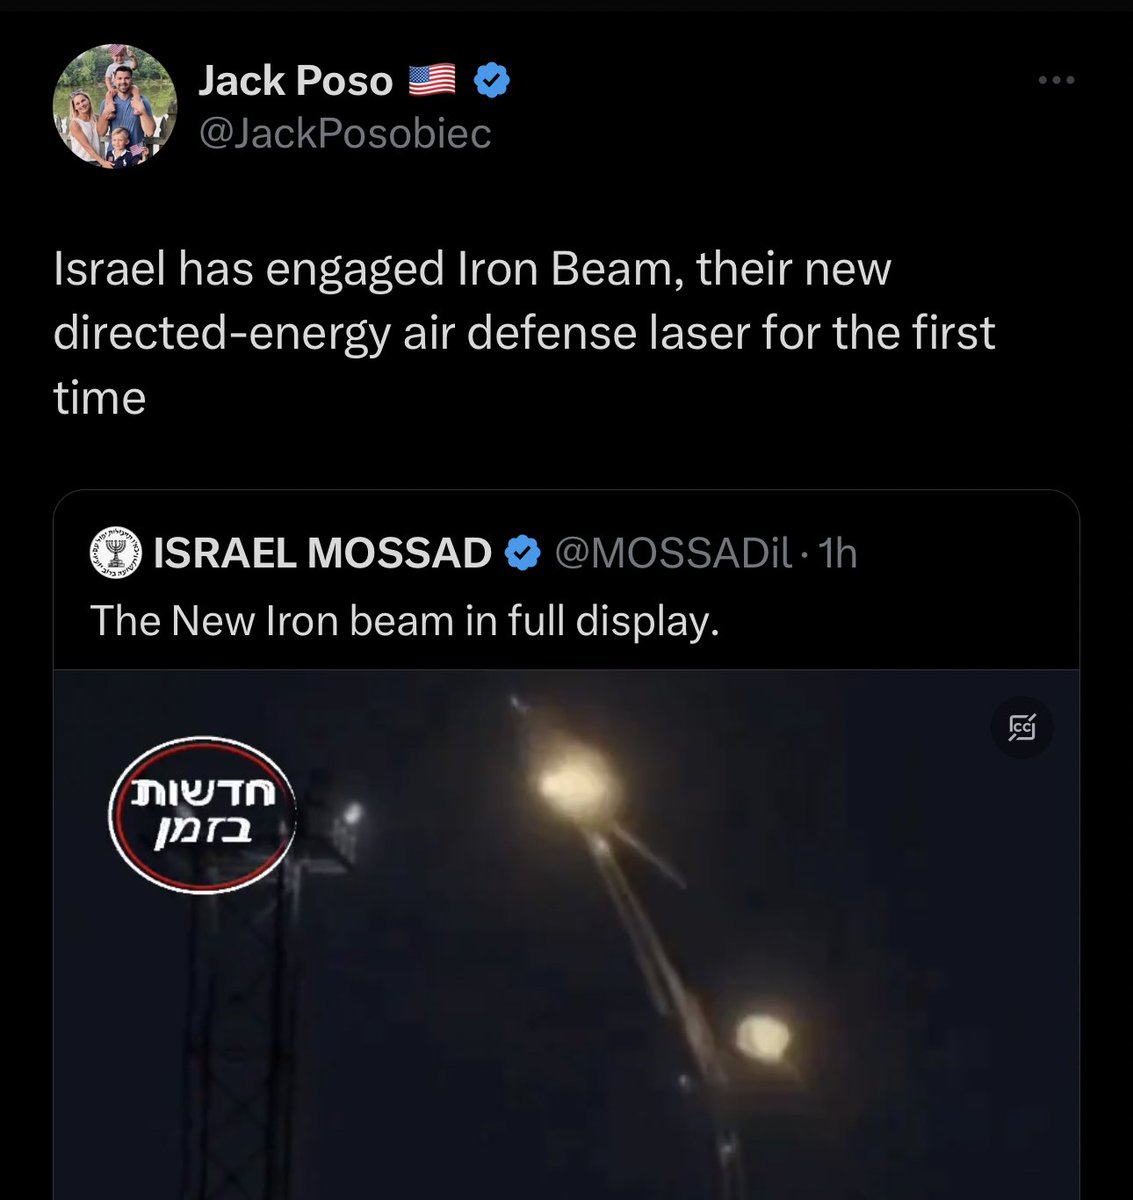 🇺🇸🇮🇱 Former US Federal Agent Jack Posobiec shared a fake video from the VIDEO GAME Arma 3, FALSELY claiming it was war footage from Israel.